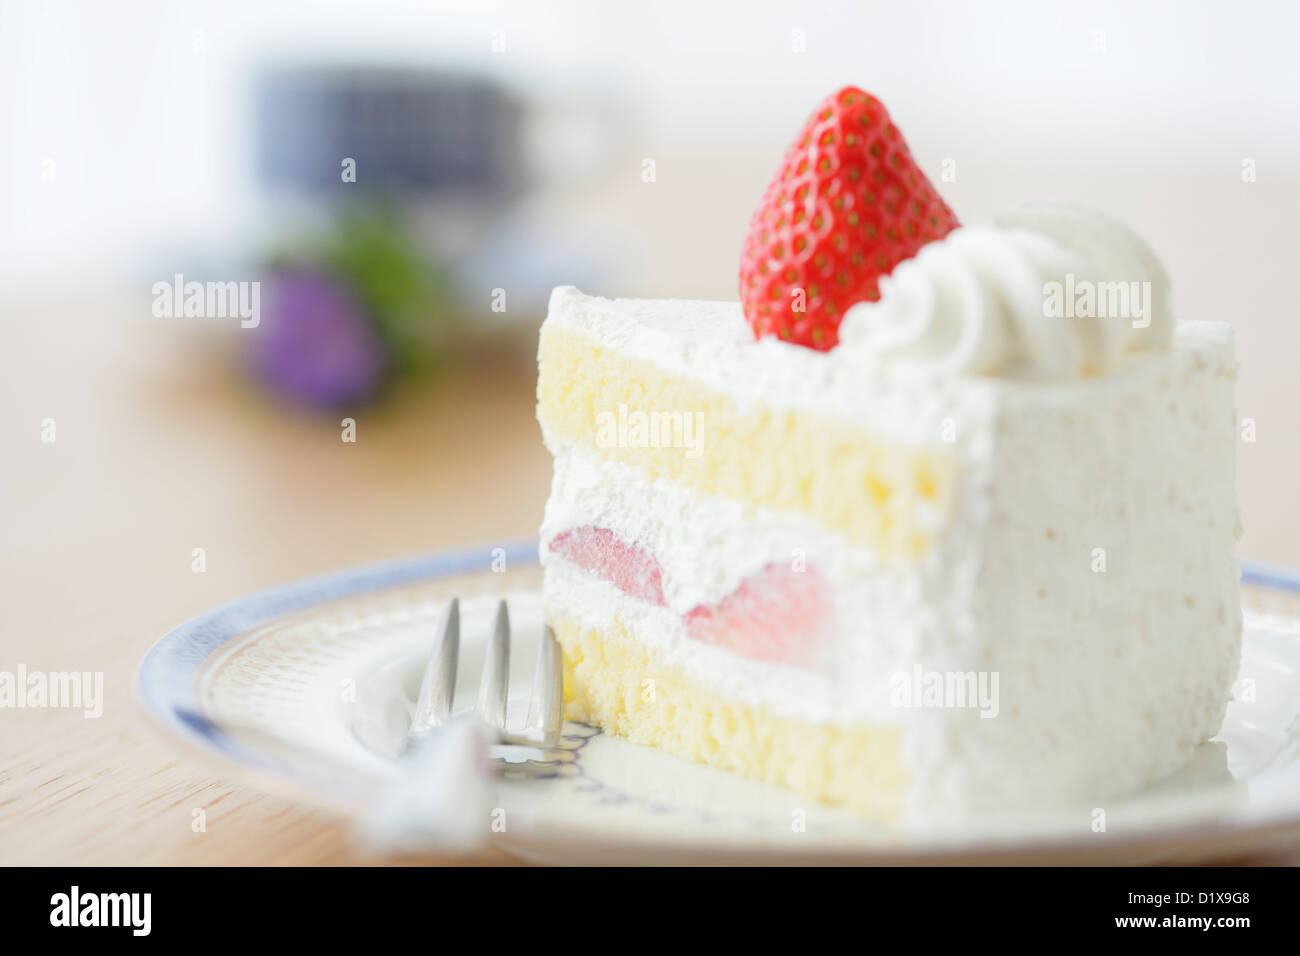 Slice of strawberry shortcake on a wooden table Stock Photo